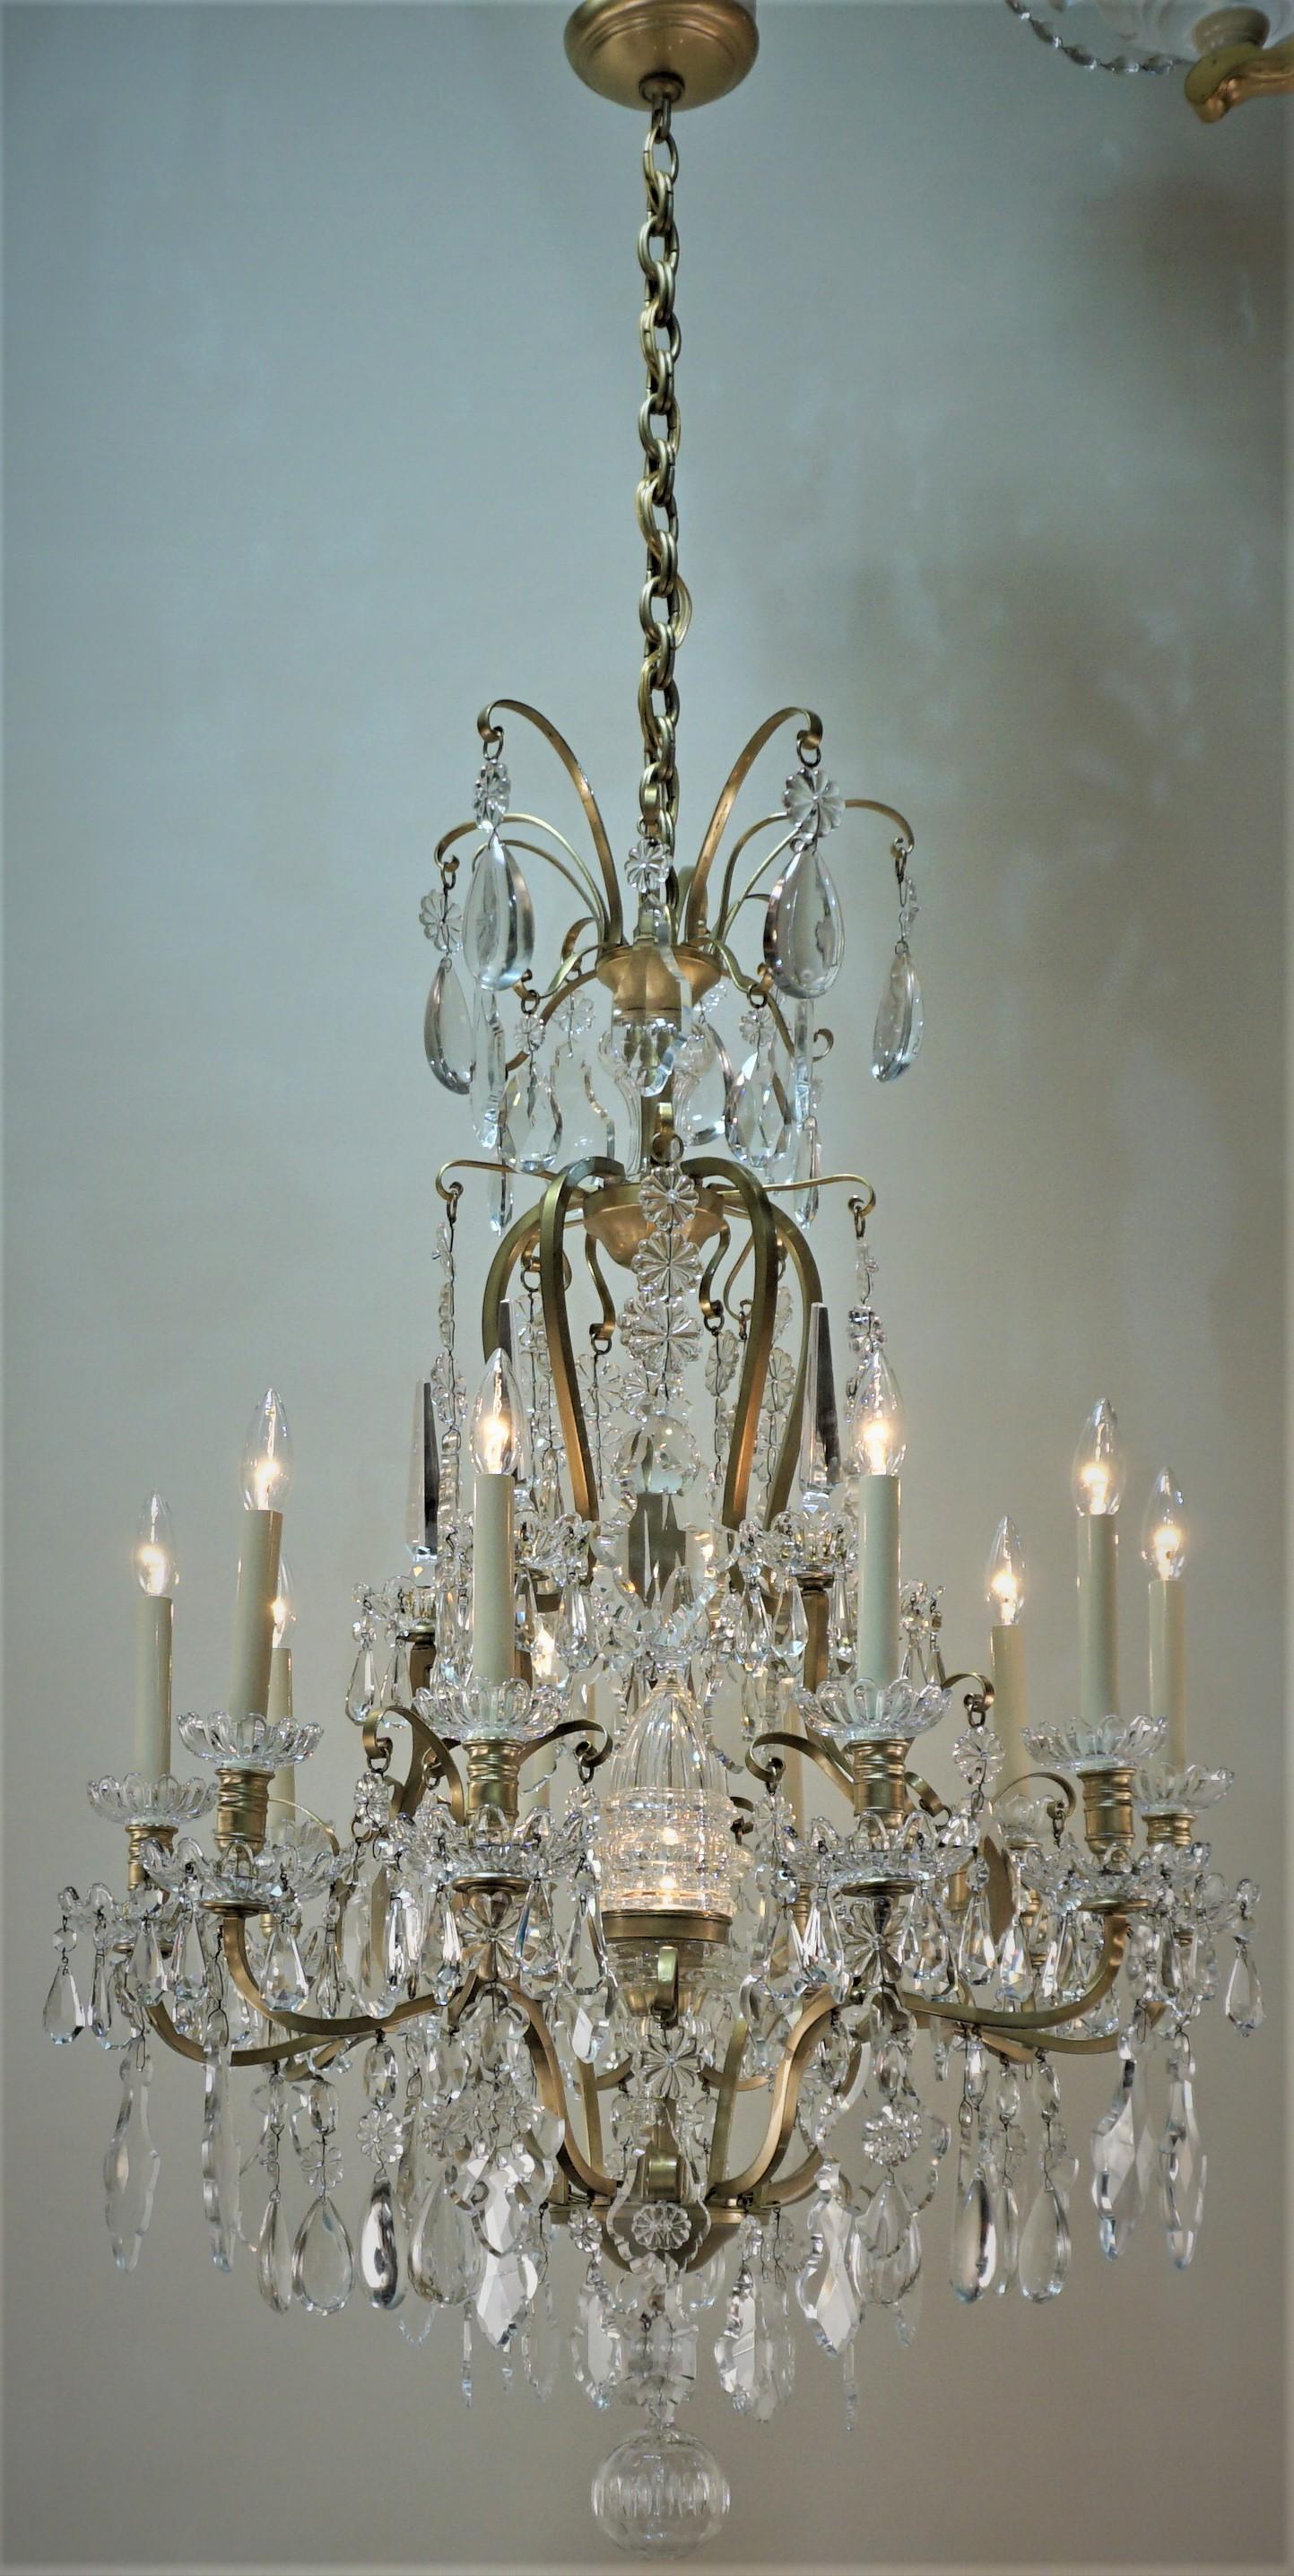 Fabulous early 20th century Baccarat crystal and bronze chandelier with ten candle lights and one center light that is house in a beautiful glass shade.
31